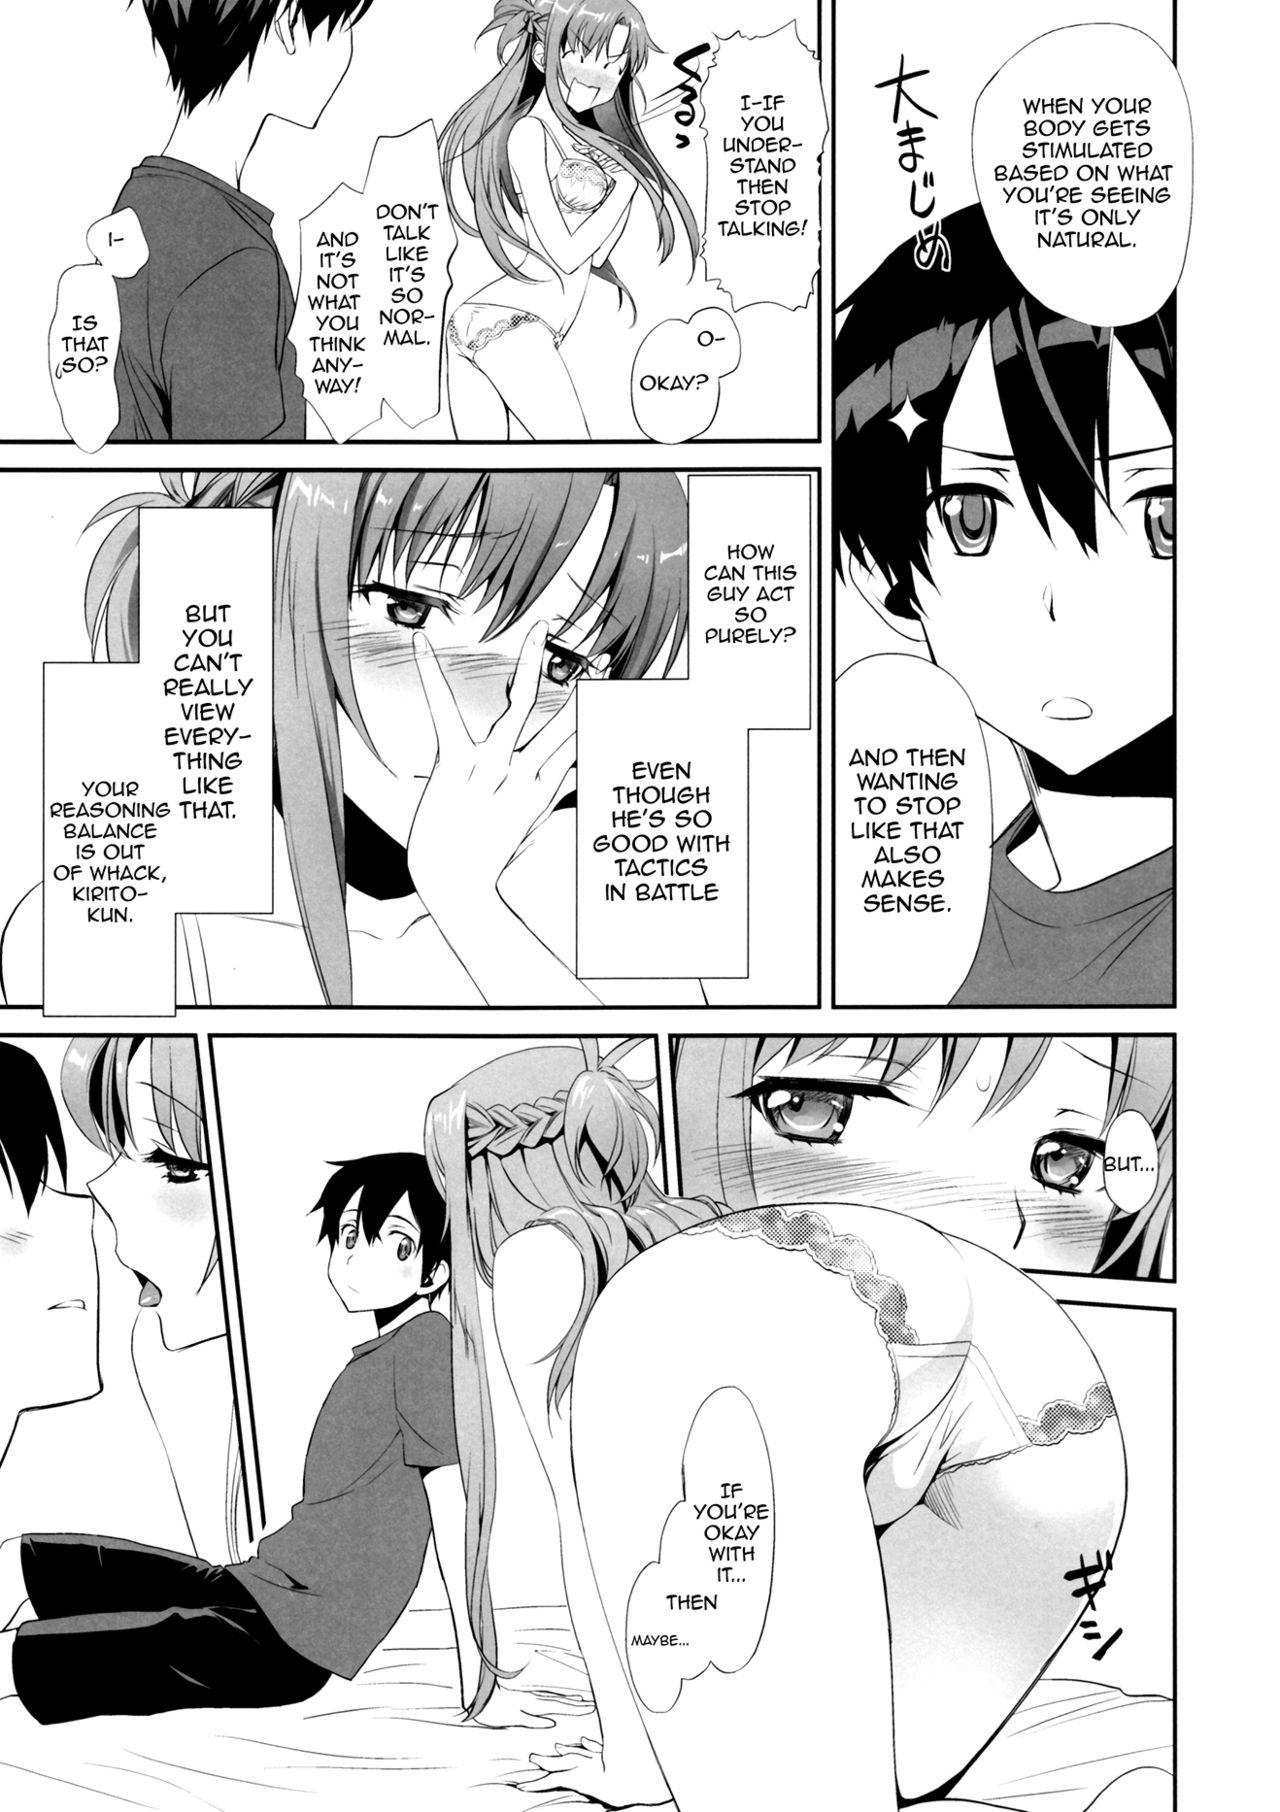 Celebrity Nudes Sunny-side up? - Sword art online Gay Reality - Page 10